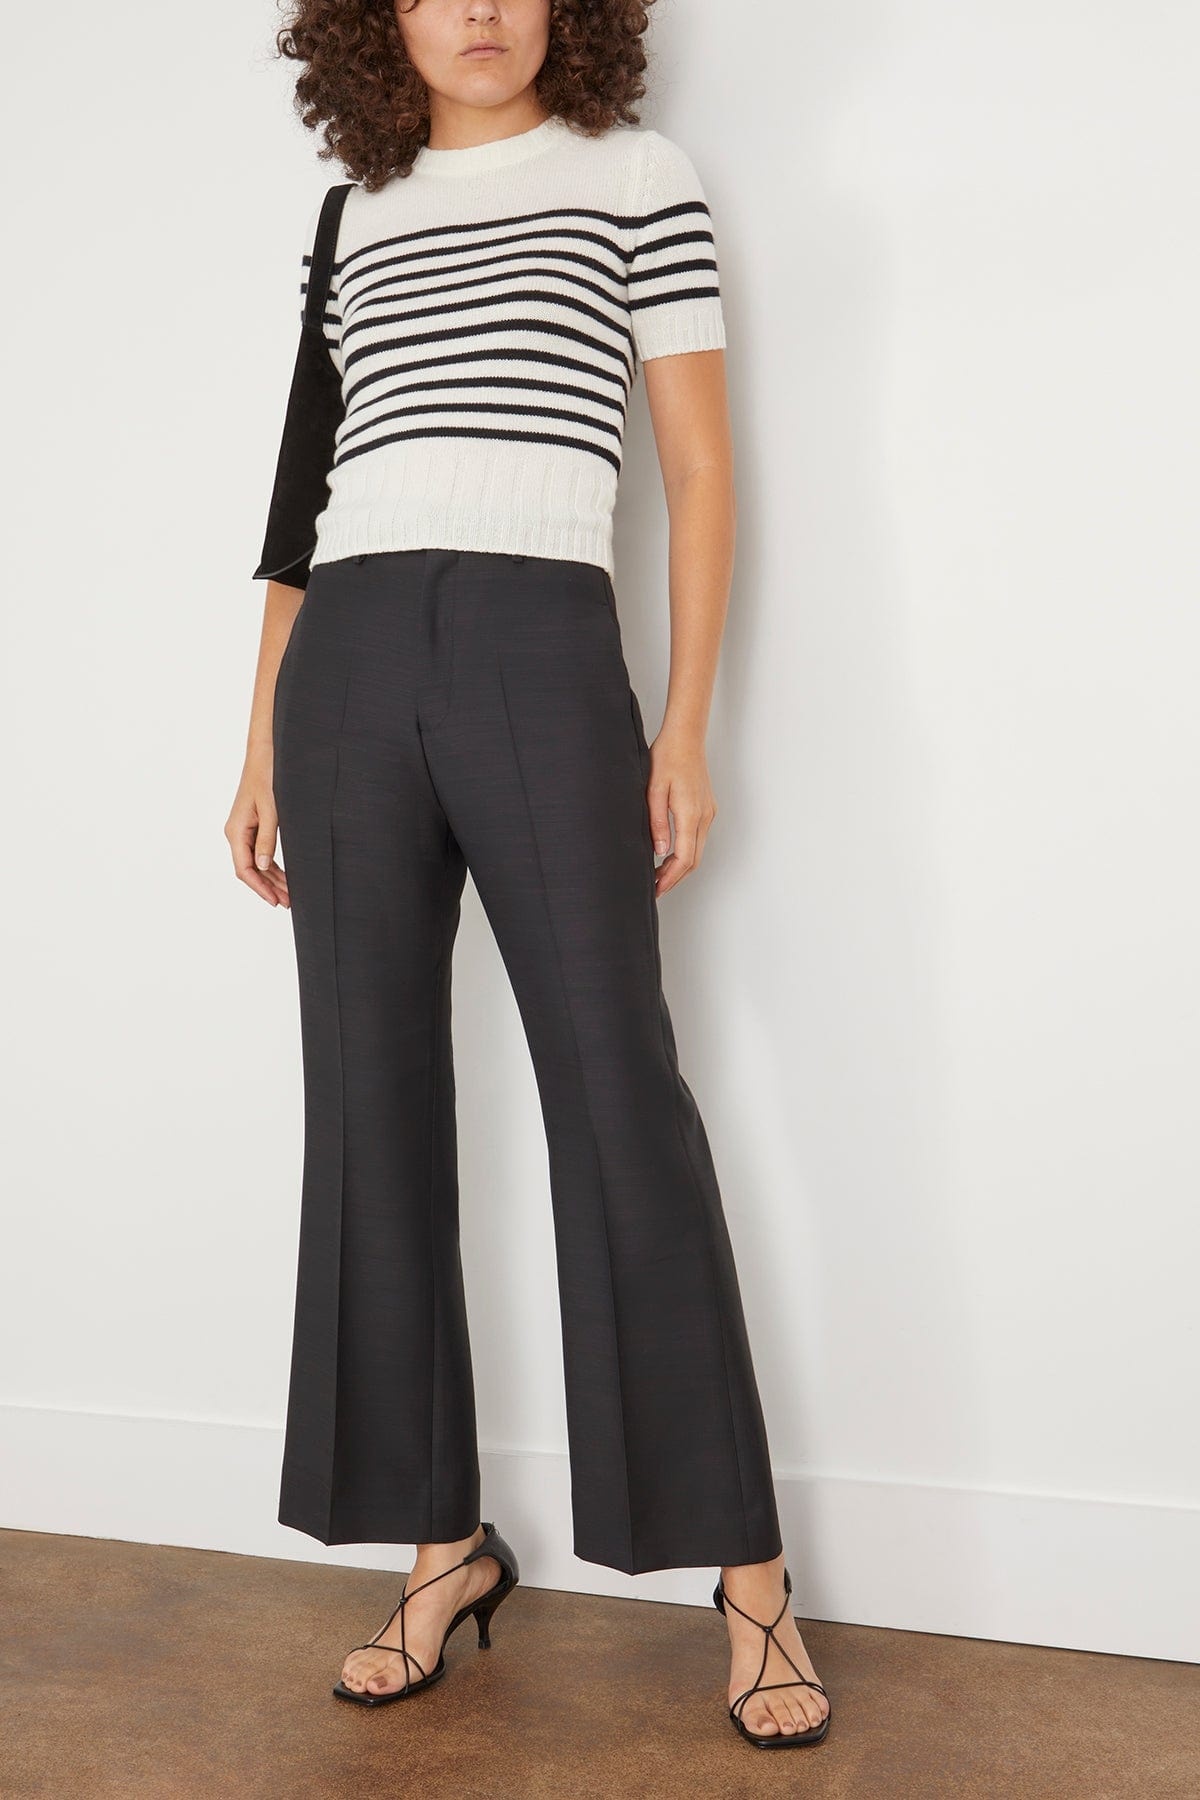 Credo Cropped Bootcut Woven Trouser in Black - 2